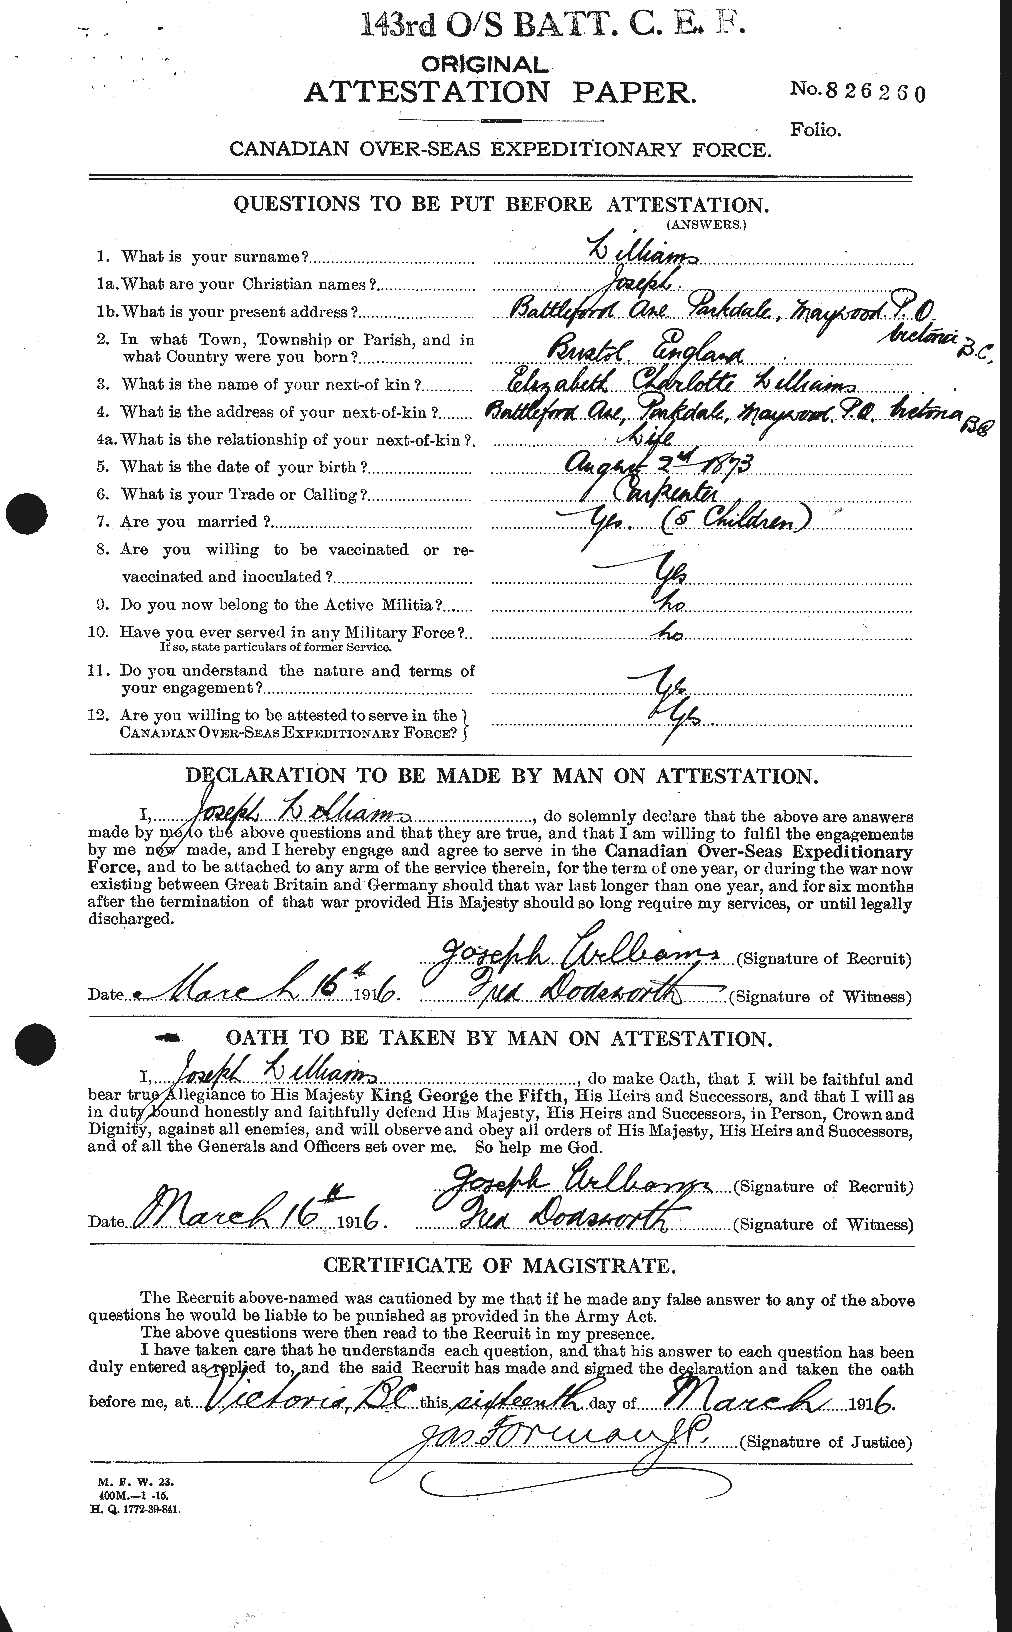 Personnel Records of the First World War - CEF 675436a